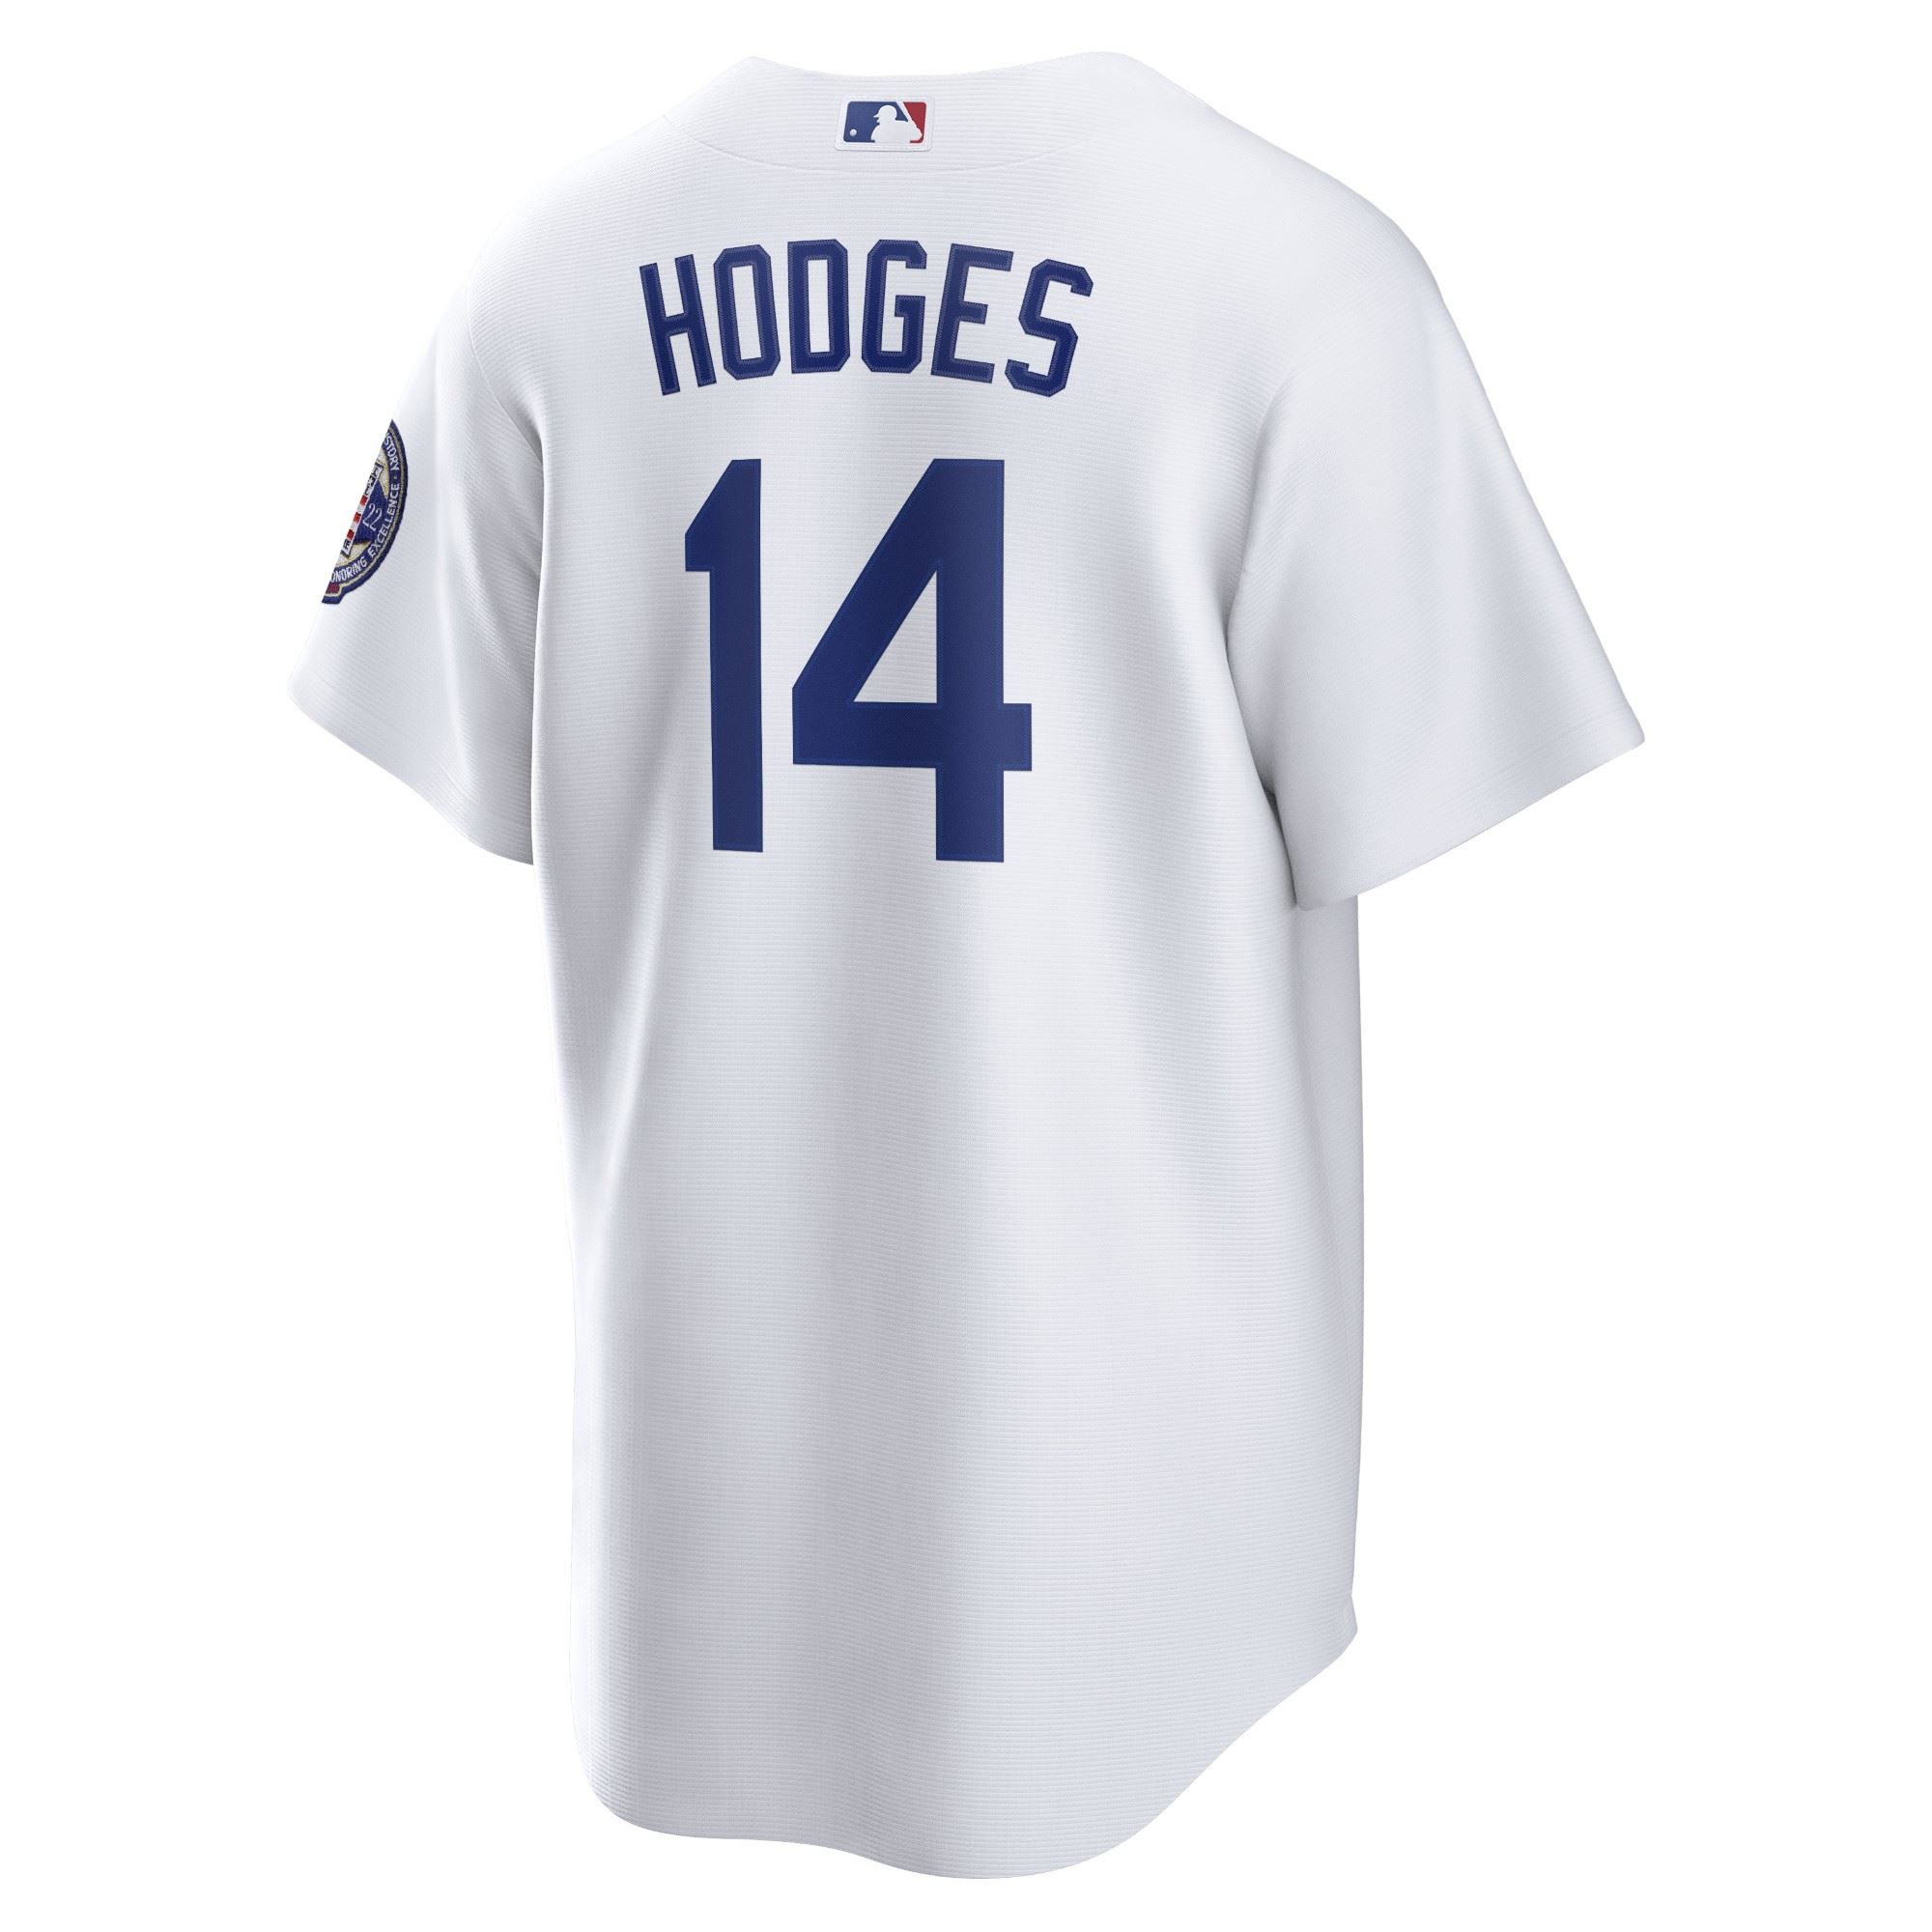 Los Angeles Dodgers White Official MLB Replica Home Jersey Nike